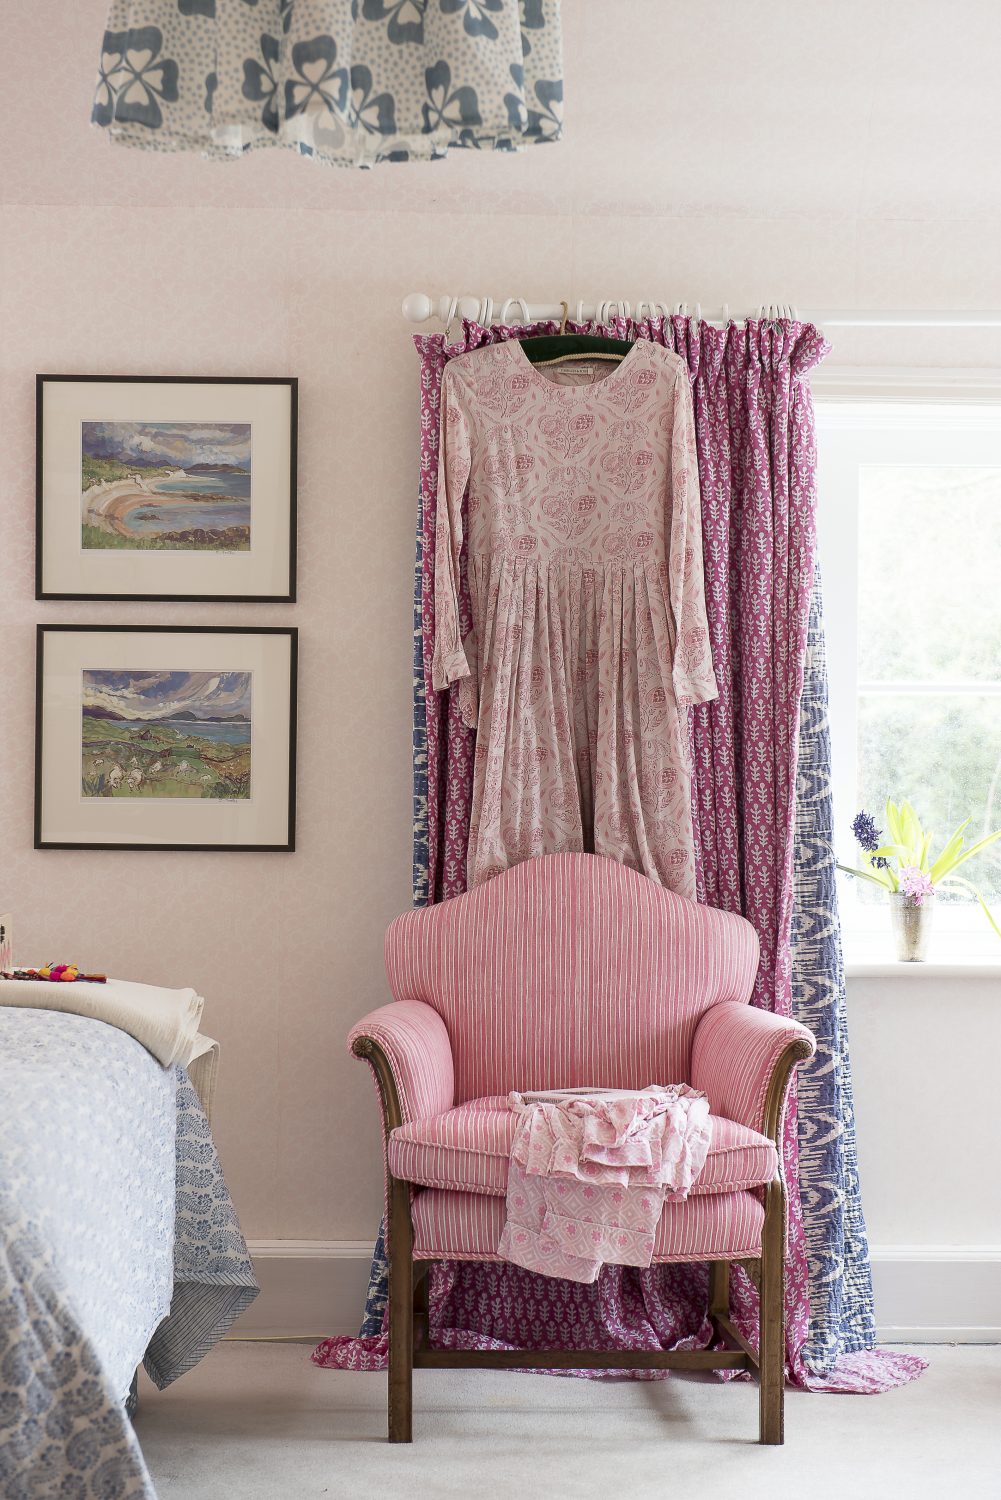 Molly’s colourful designs sing out from every corner